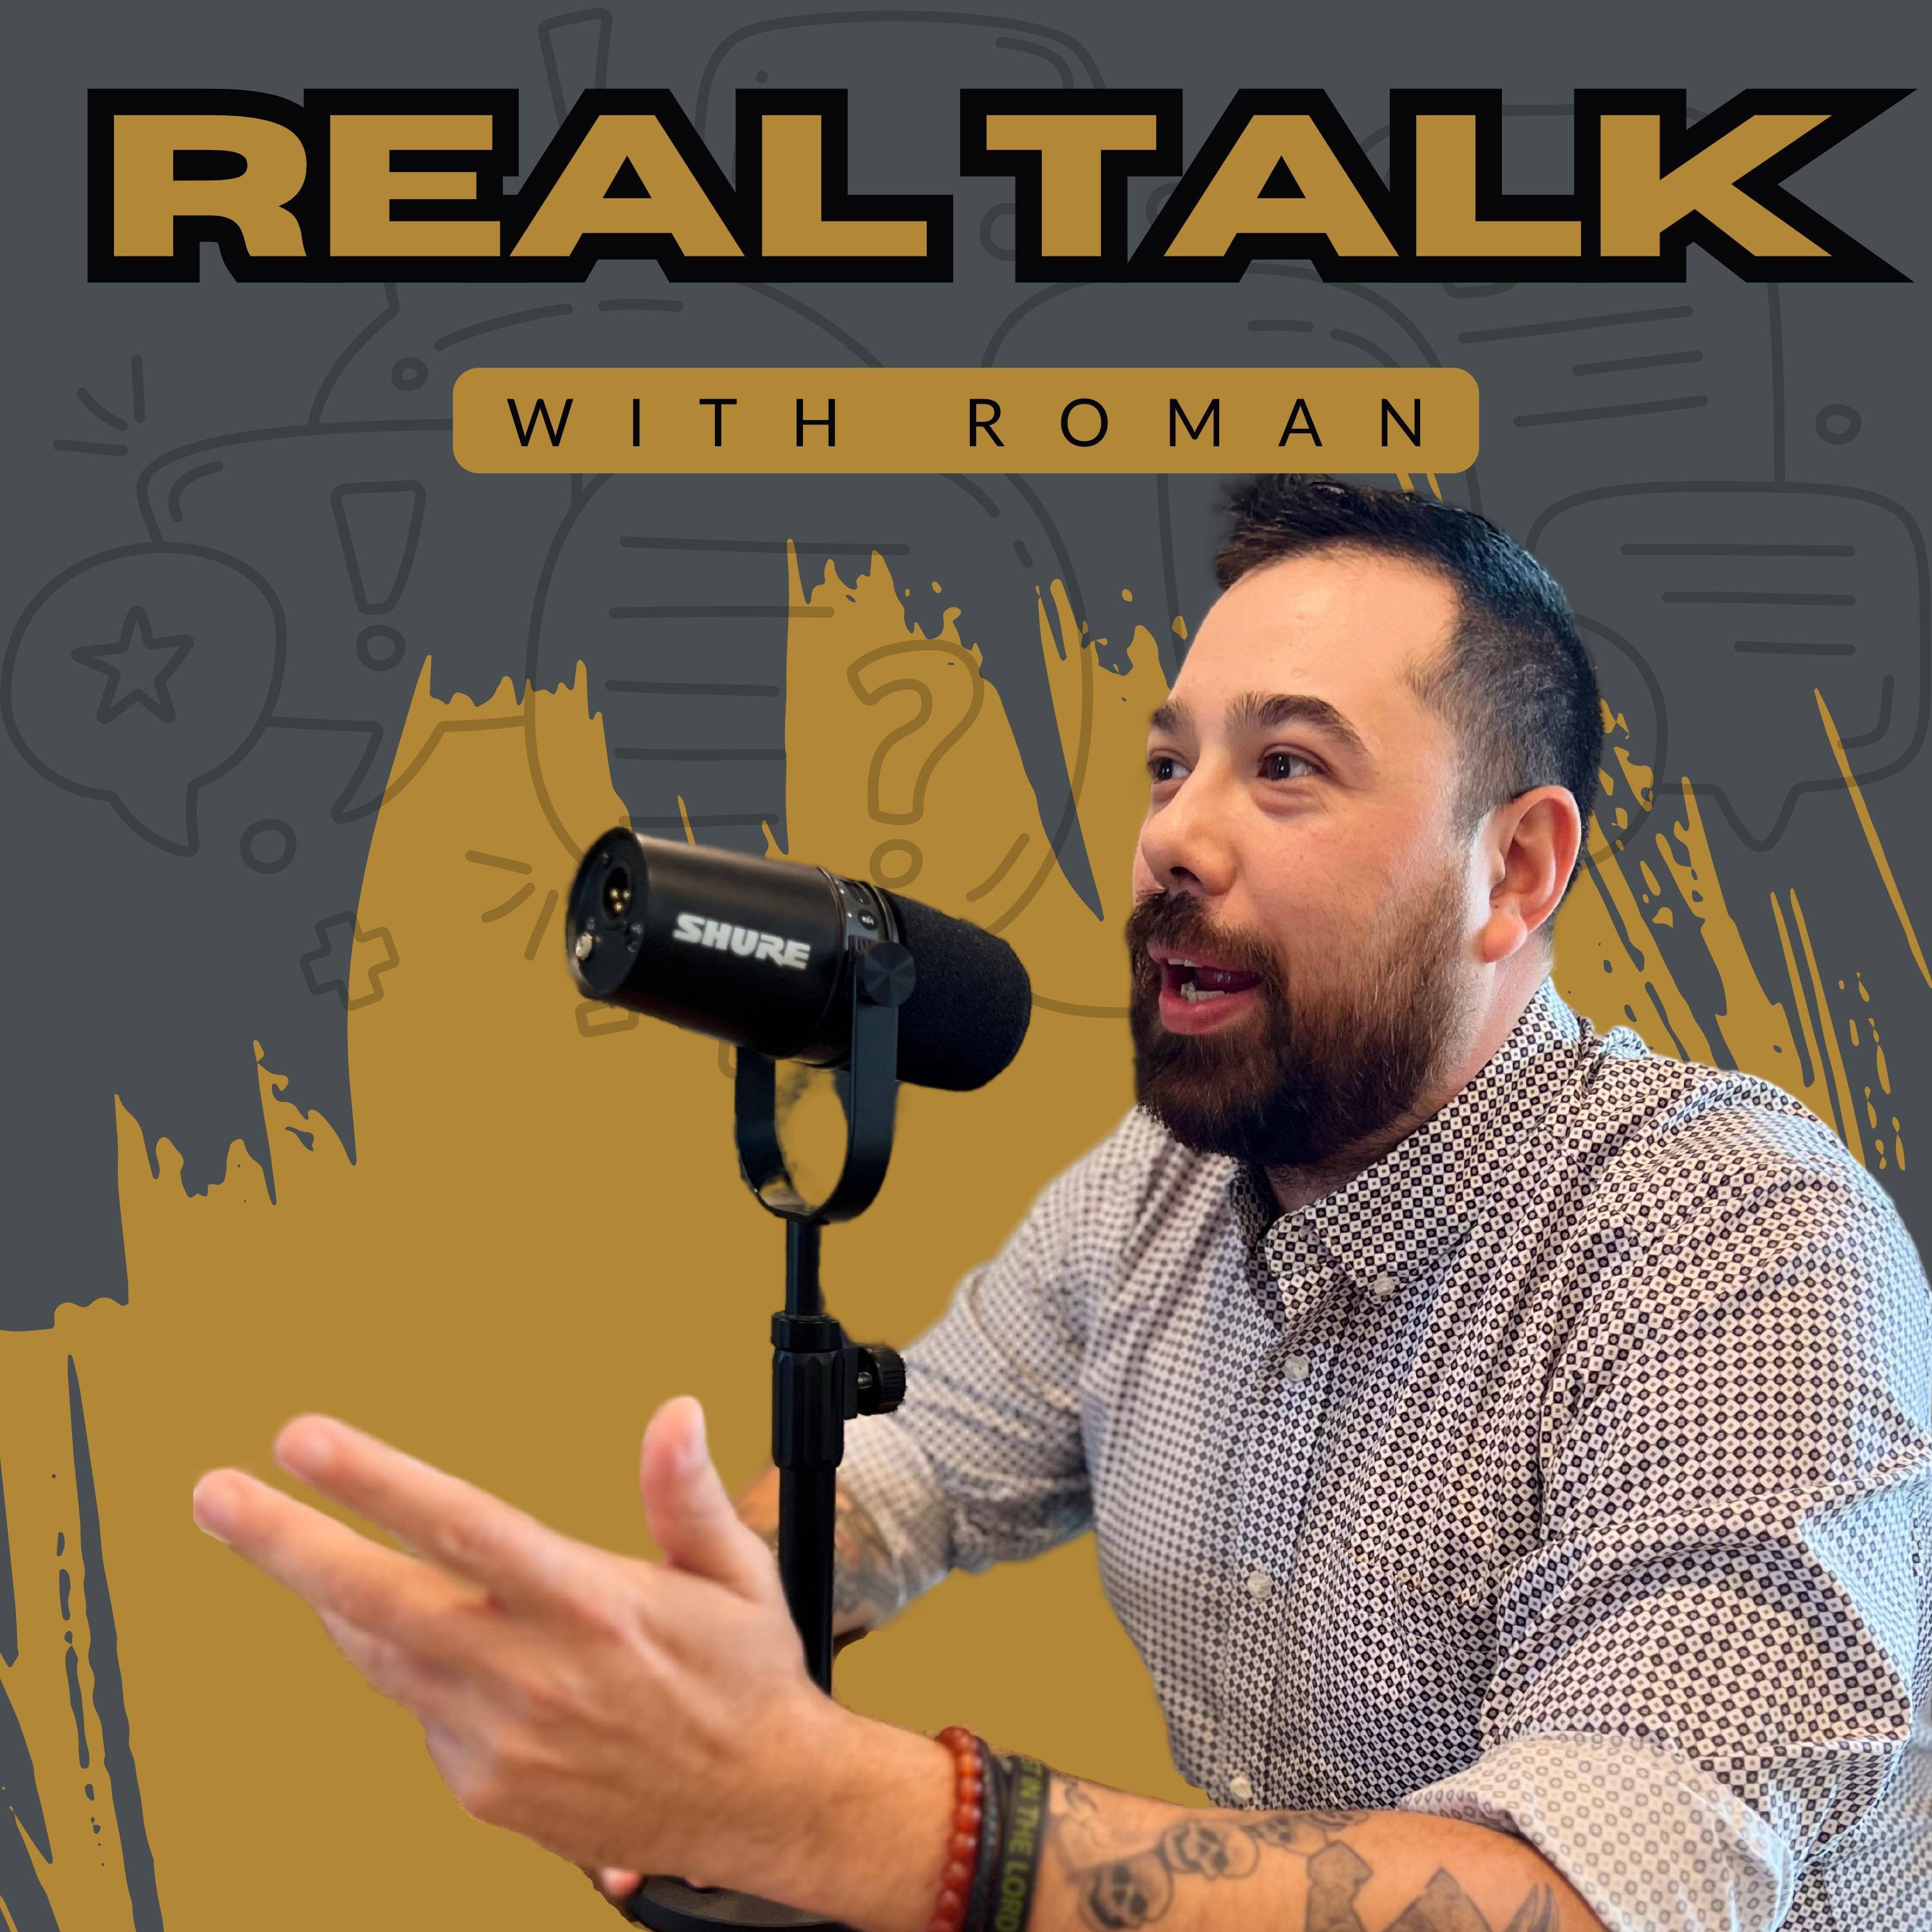 Real Talk with Roman 